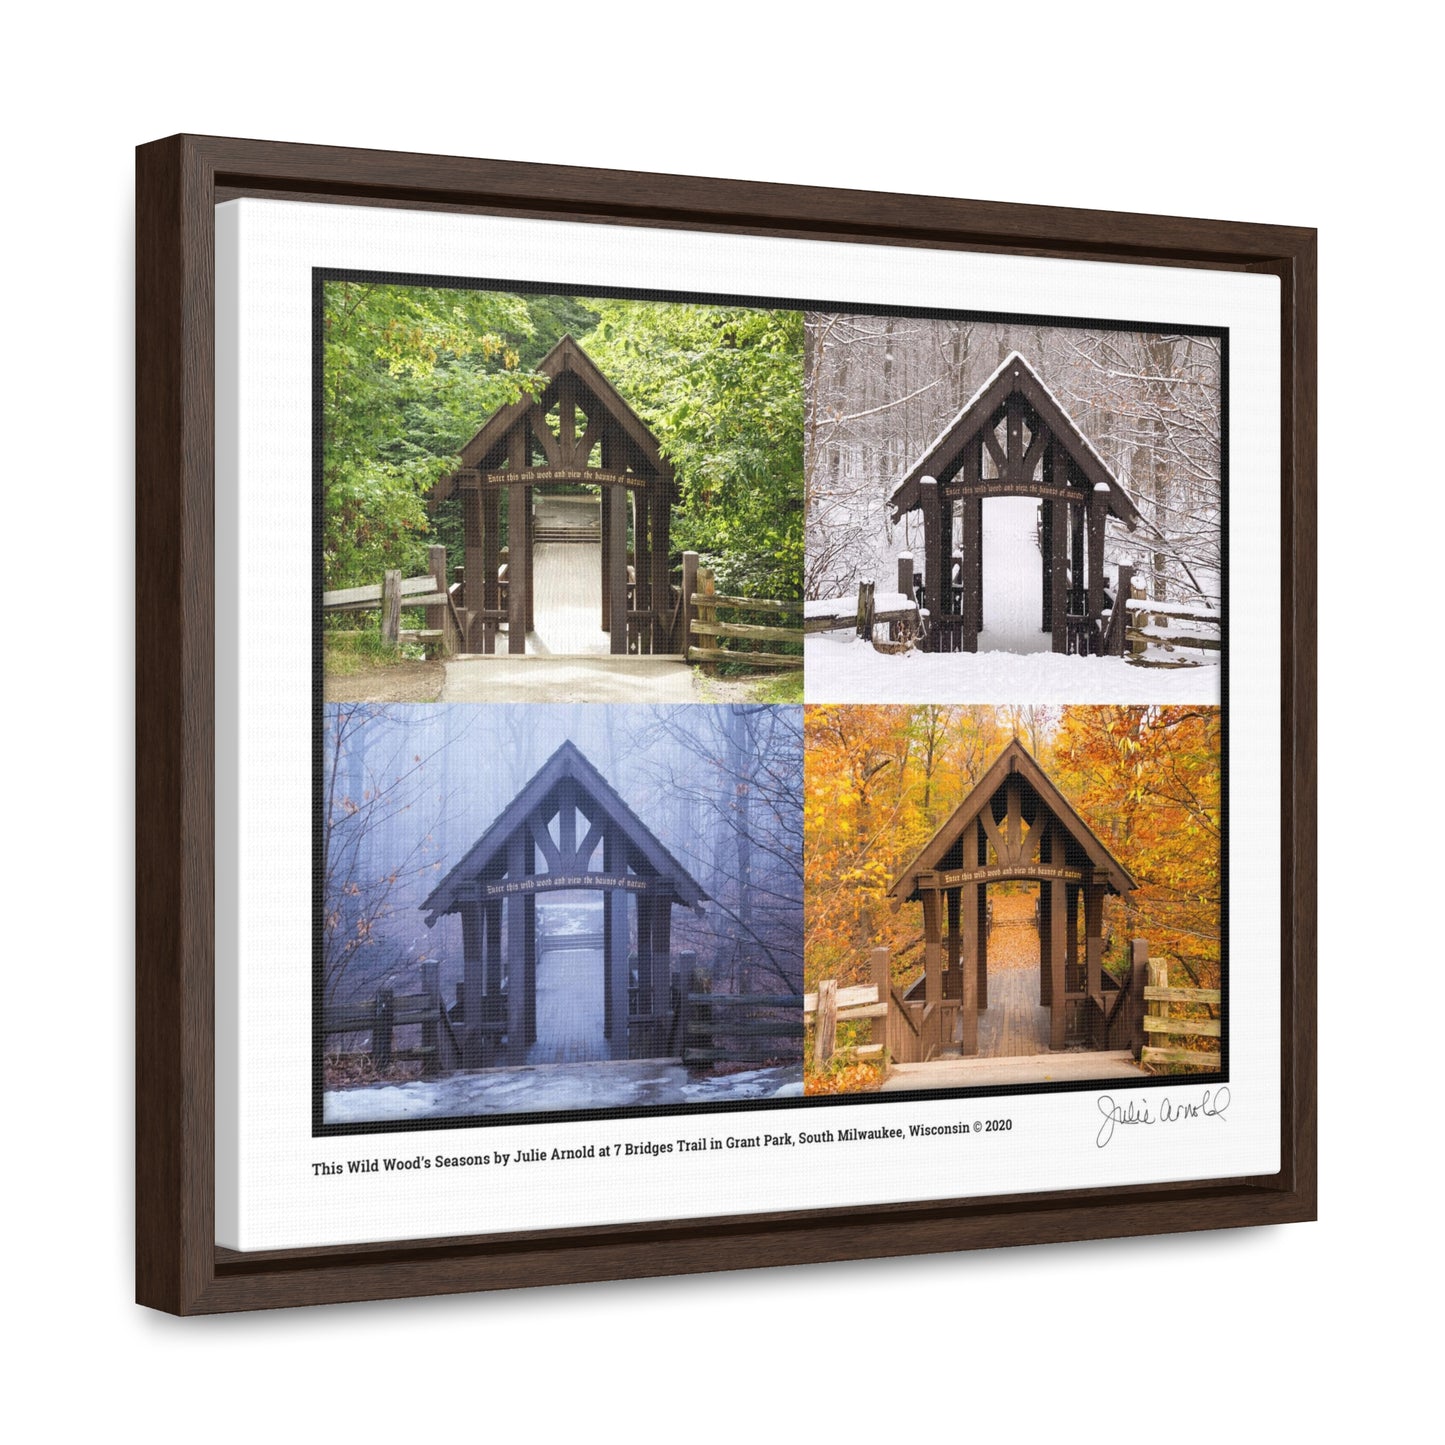 7 Bridges Trail’s Covered Bridge at Grant Park in South Milwaukee Wisconsin, All 4 Seasons Photo Collage, Framed Canvas Wrap Wall Art